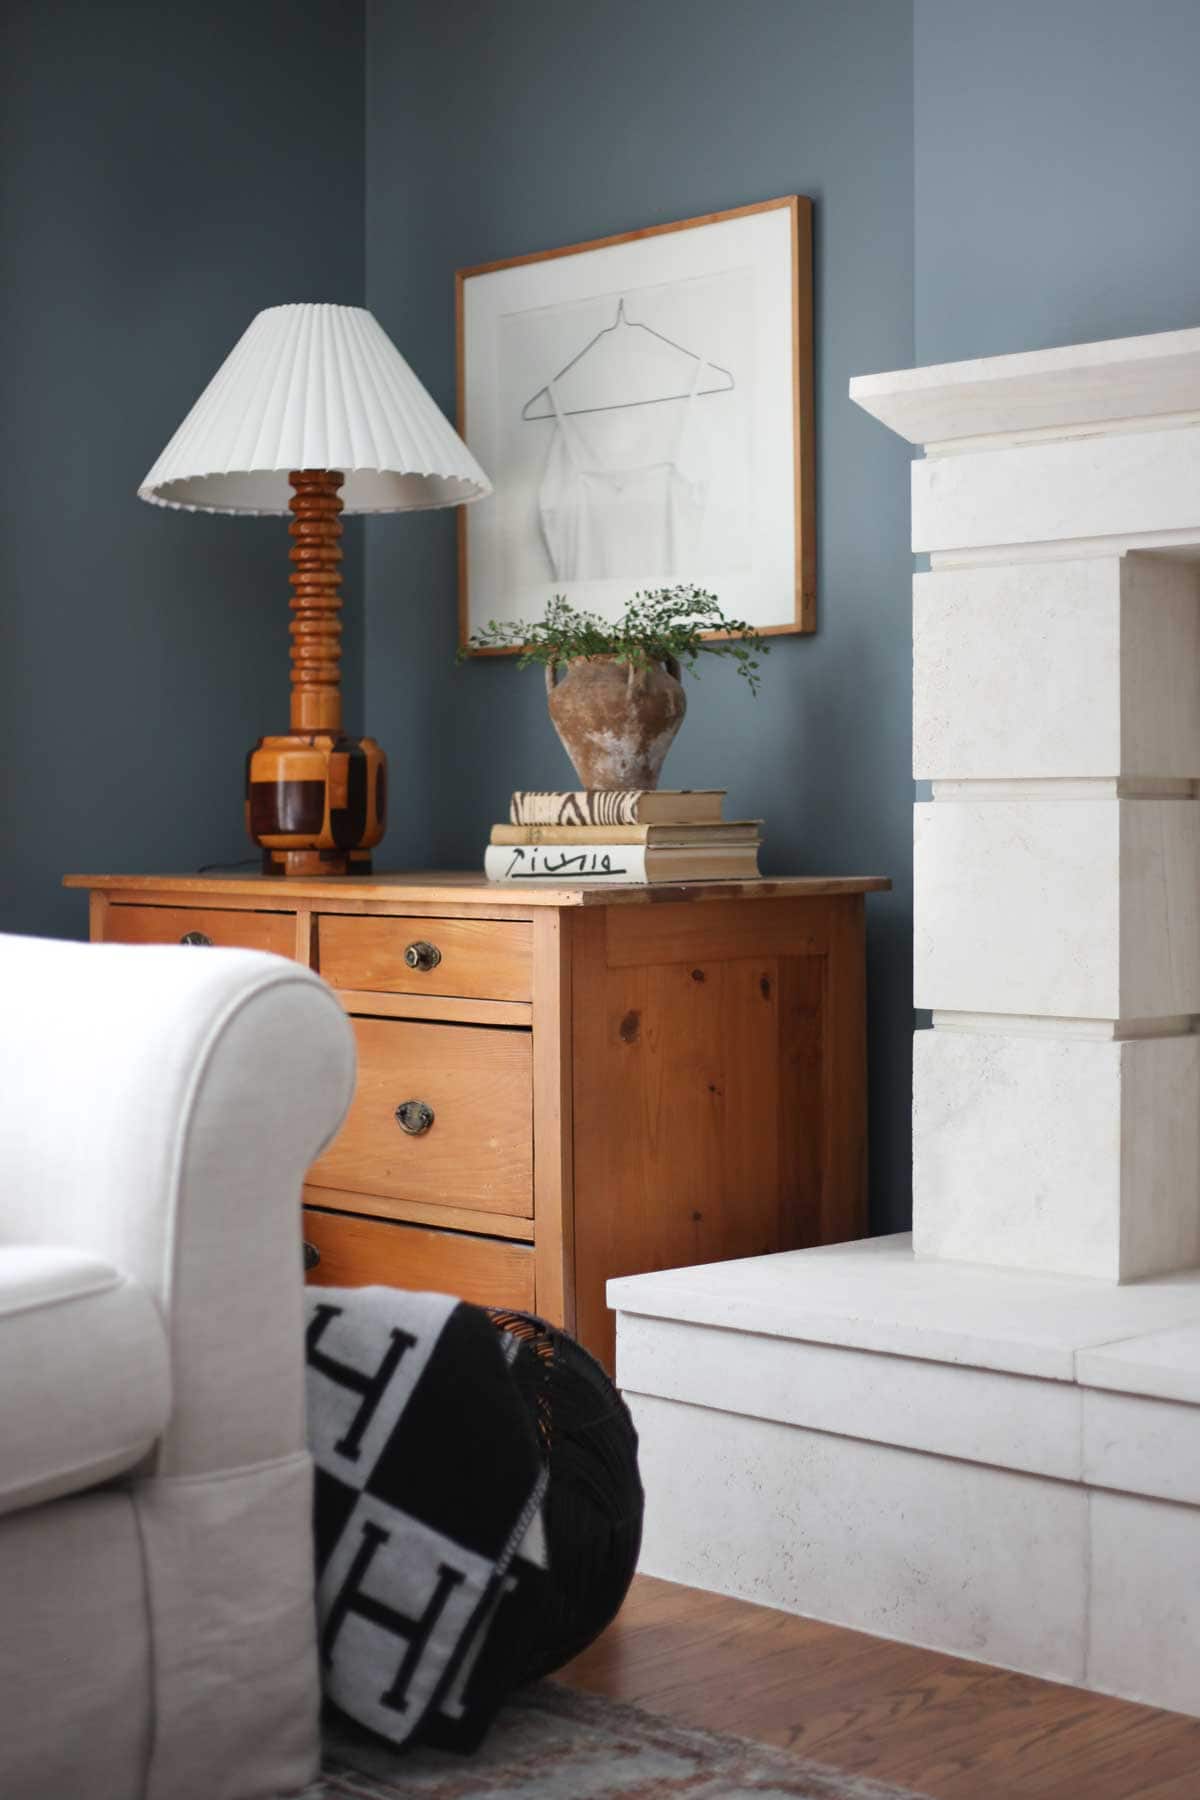 Farrow & Ball De Nimes paint in eclectic modern living room with vintage decor finds